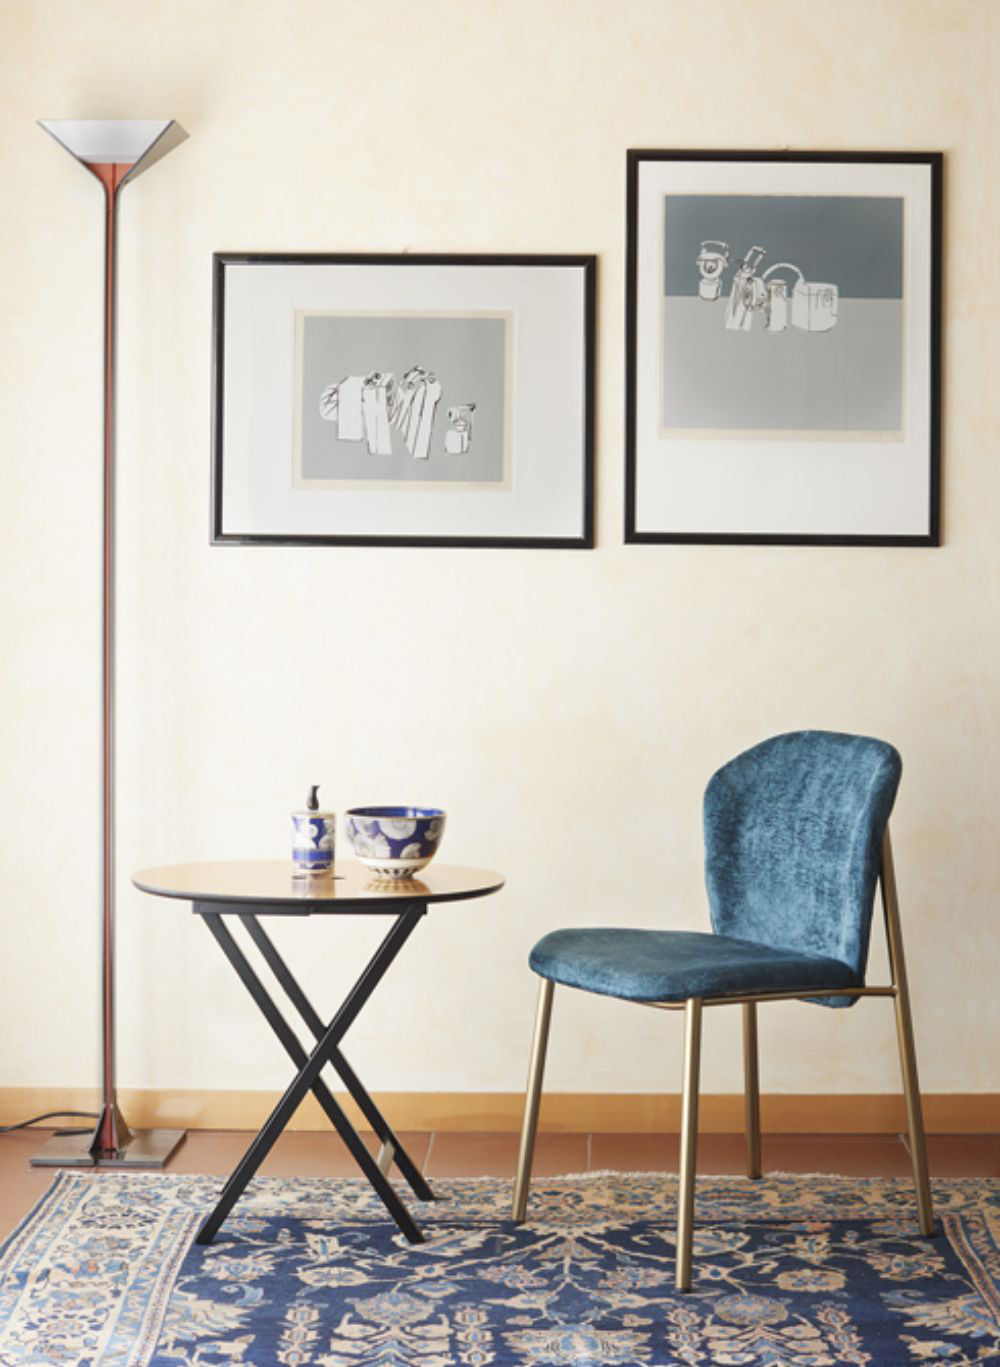 Finn Padded Chair with Wall Art and Round Table in Living Room Setting